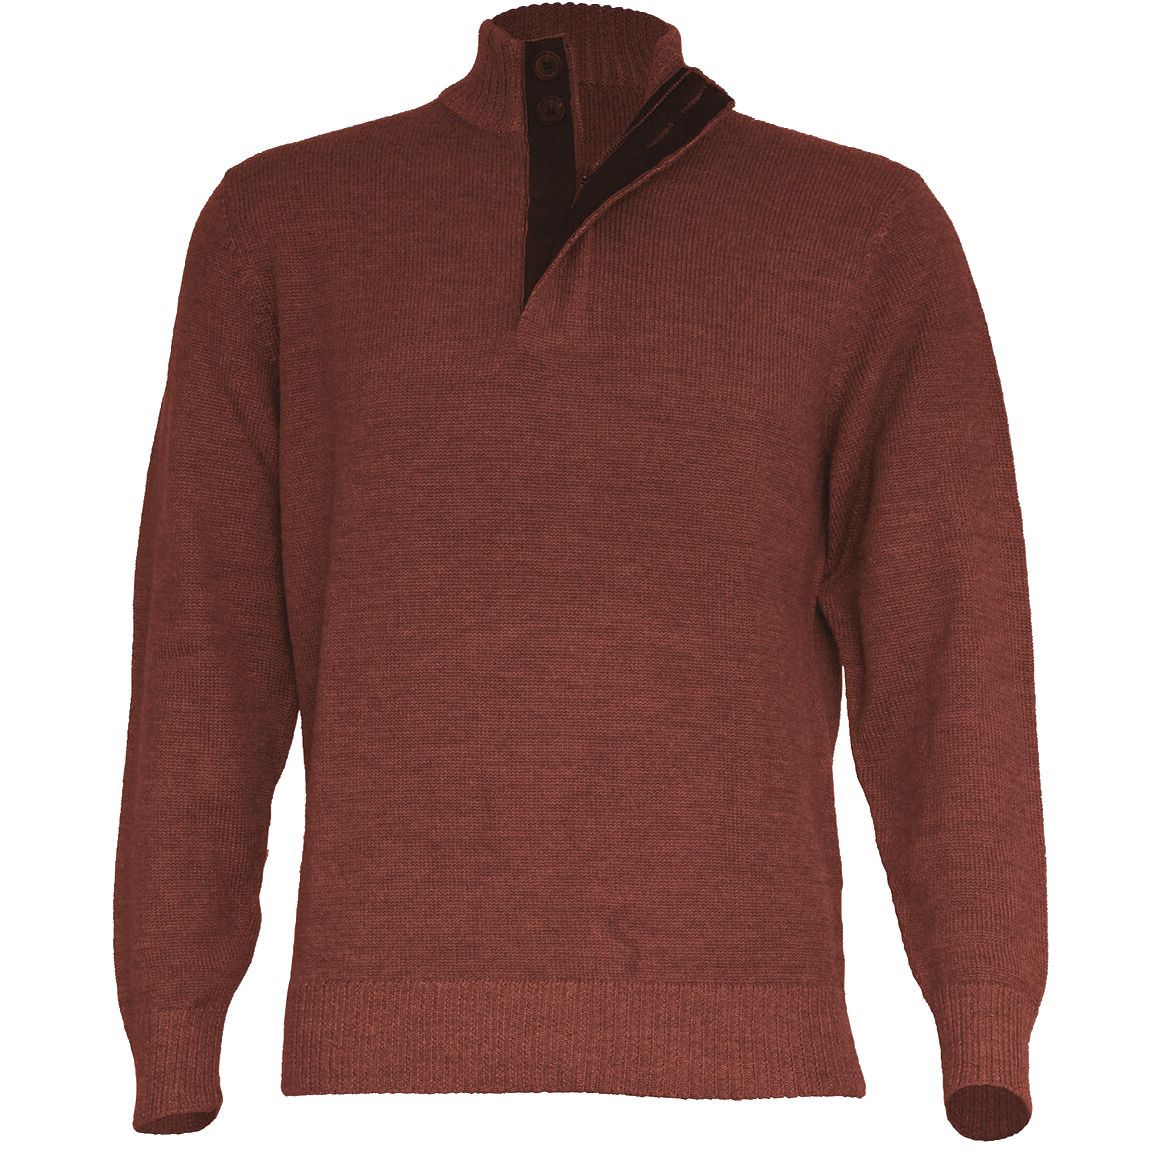 Royal Alpaca Half-Zip Button-Mock Medium Weight Sweater in Rust and Charcoal Heather by Peru Unlimited